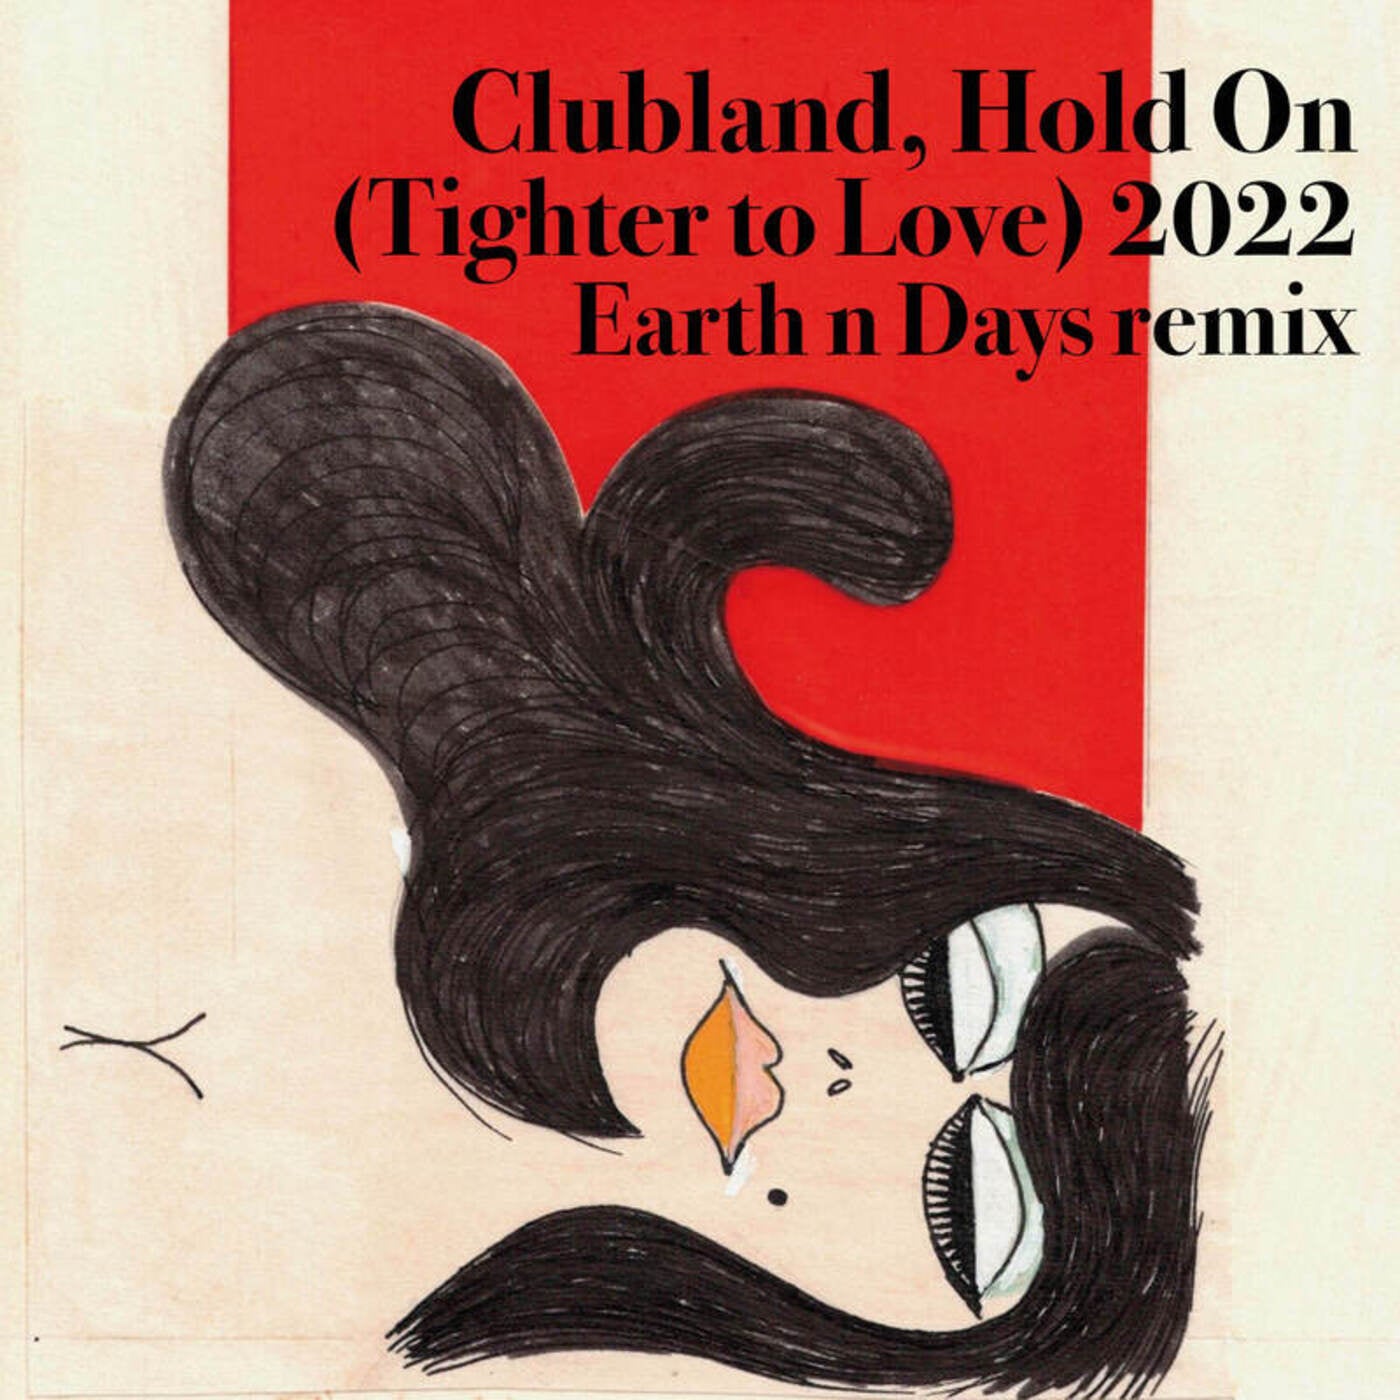 Hold On (Tighter to Love) 2022 (Earth n Days Remix)